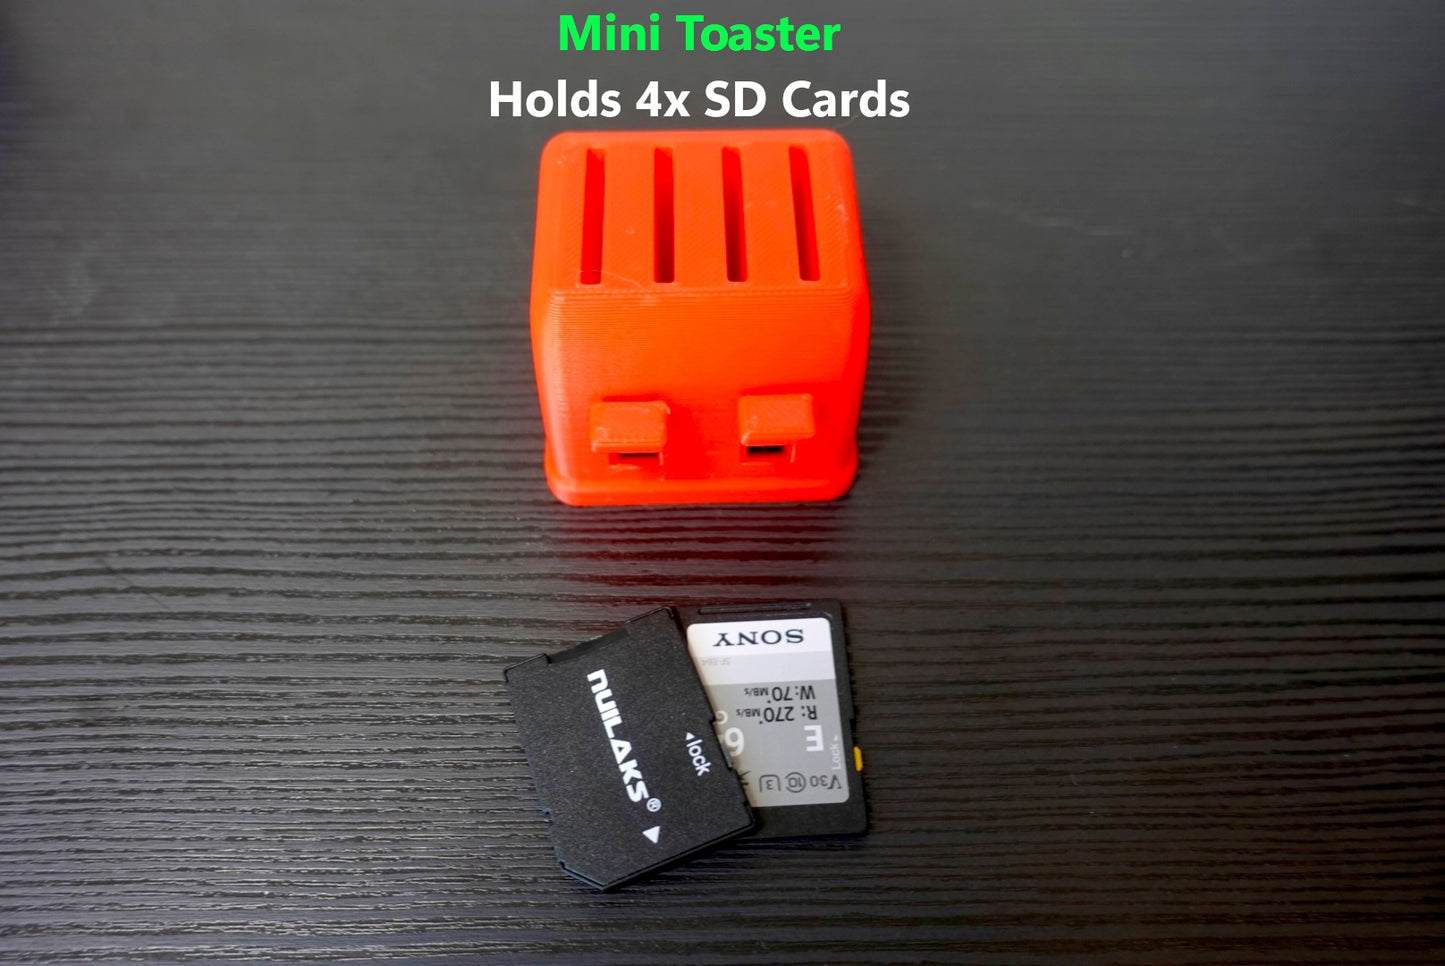 Mini Toaster Switch or SD card holder